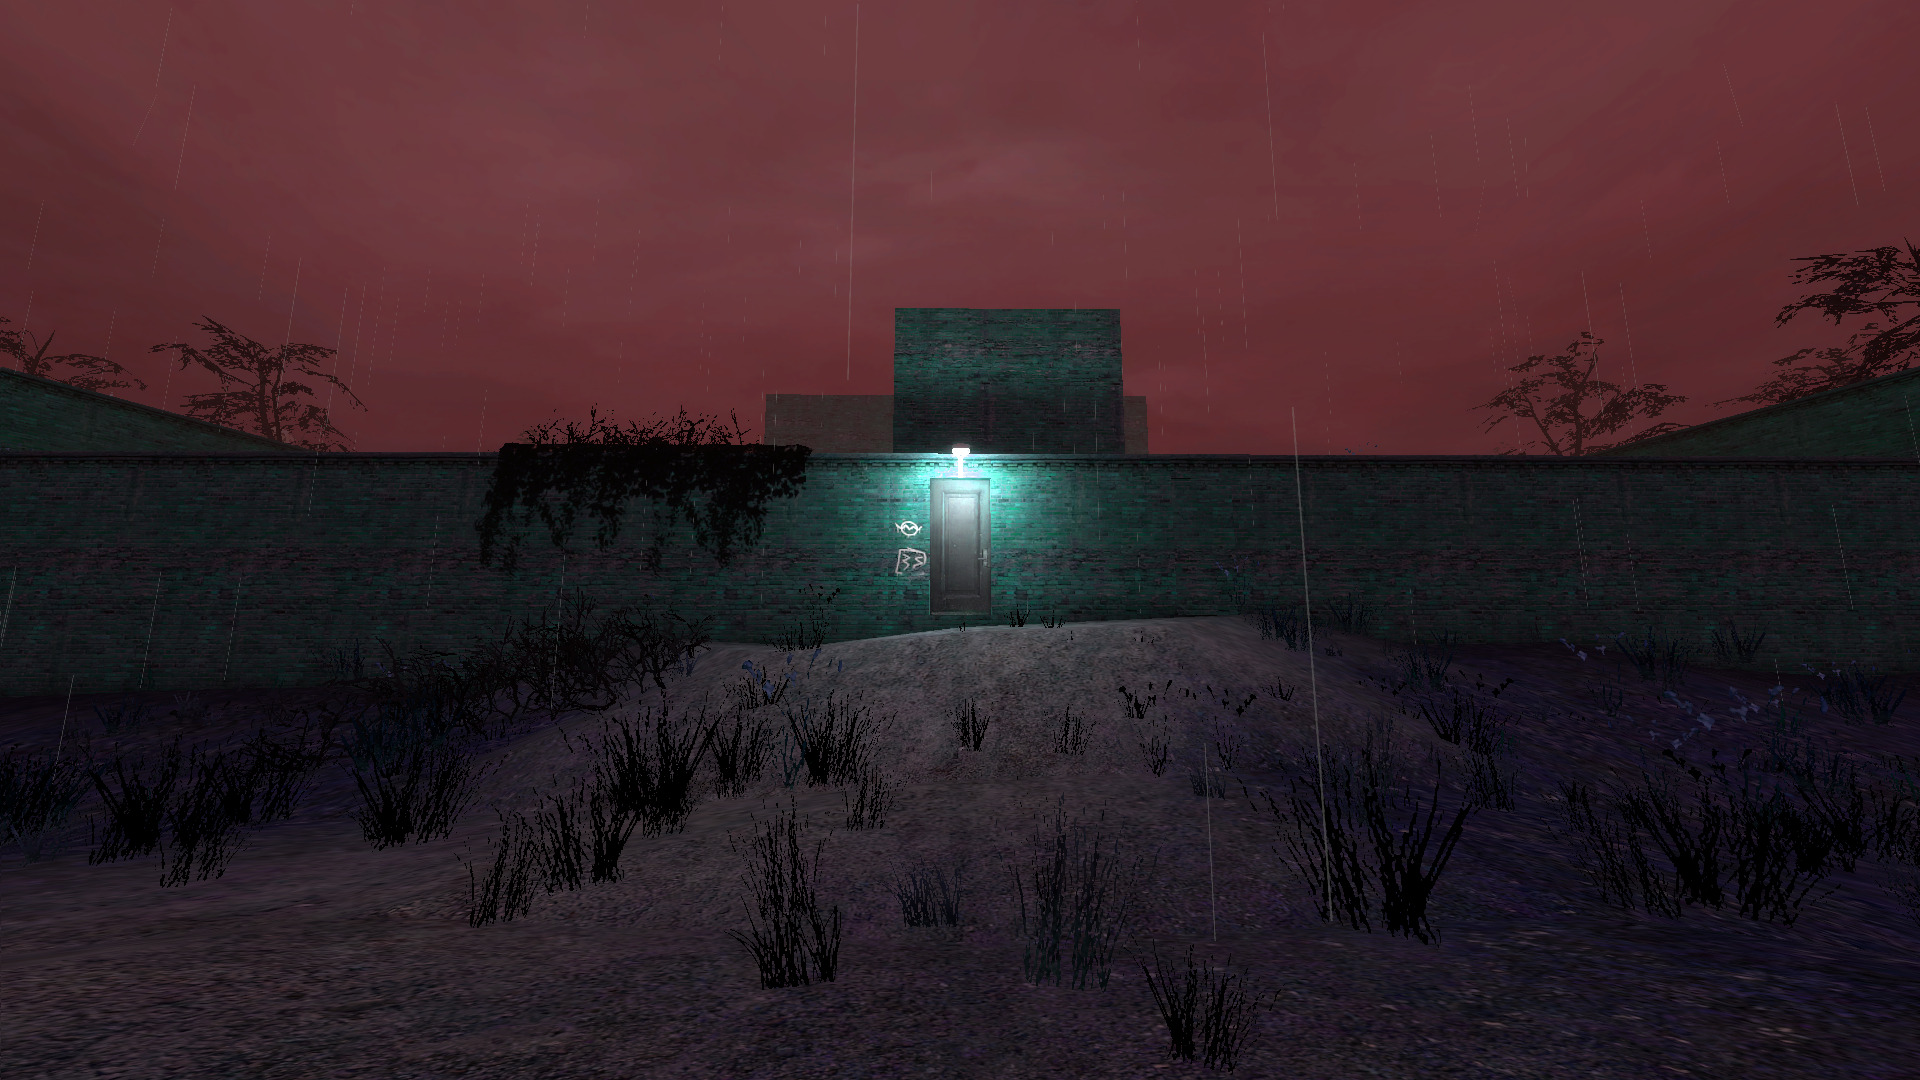 A door in the side of a wall, with a light sitting atop. The sky above is a pale red, and it is raining. The viewer stands on grassy dirt.